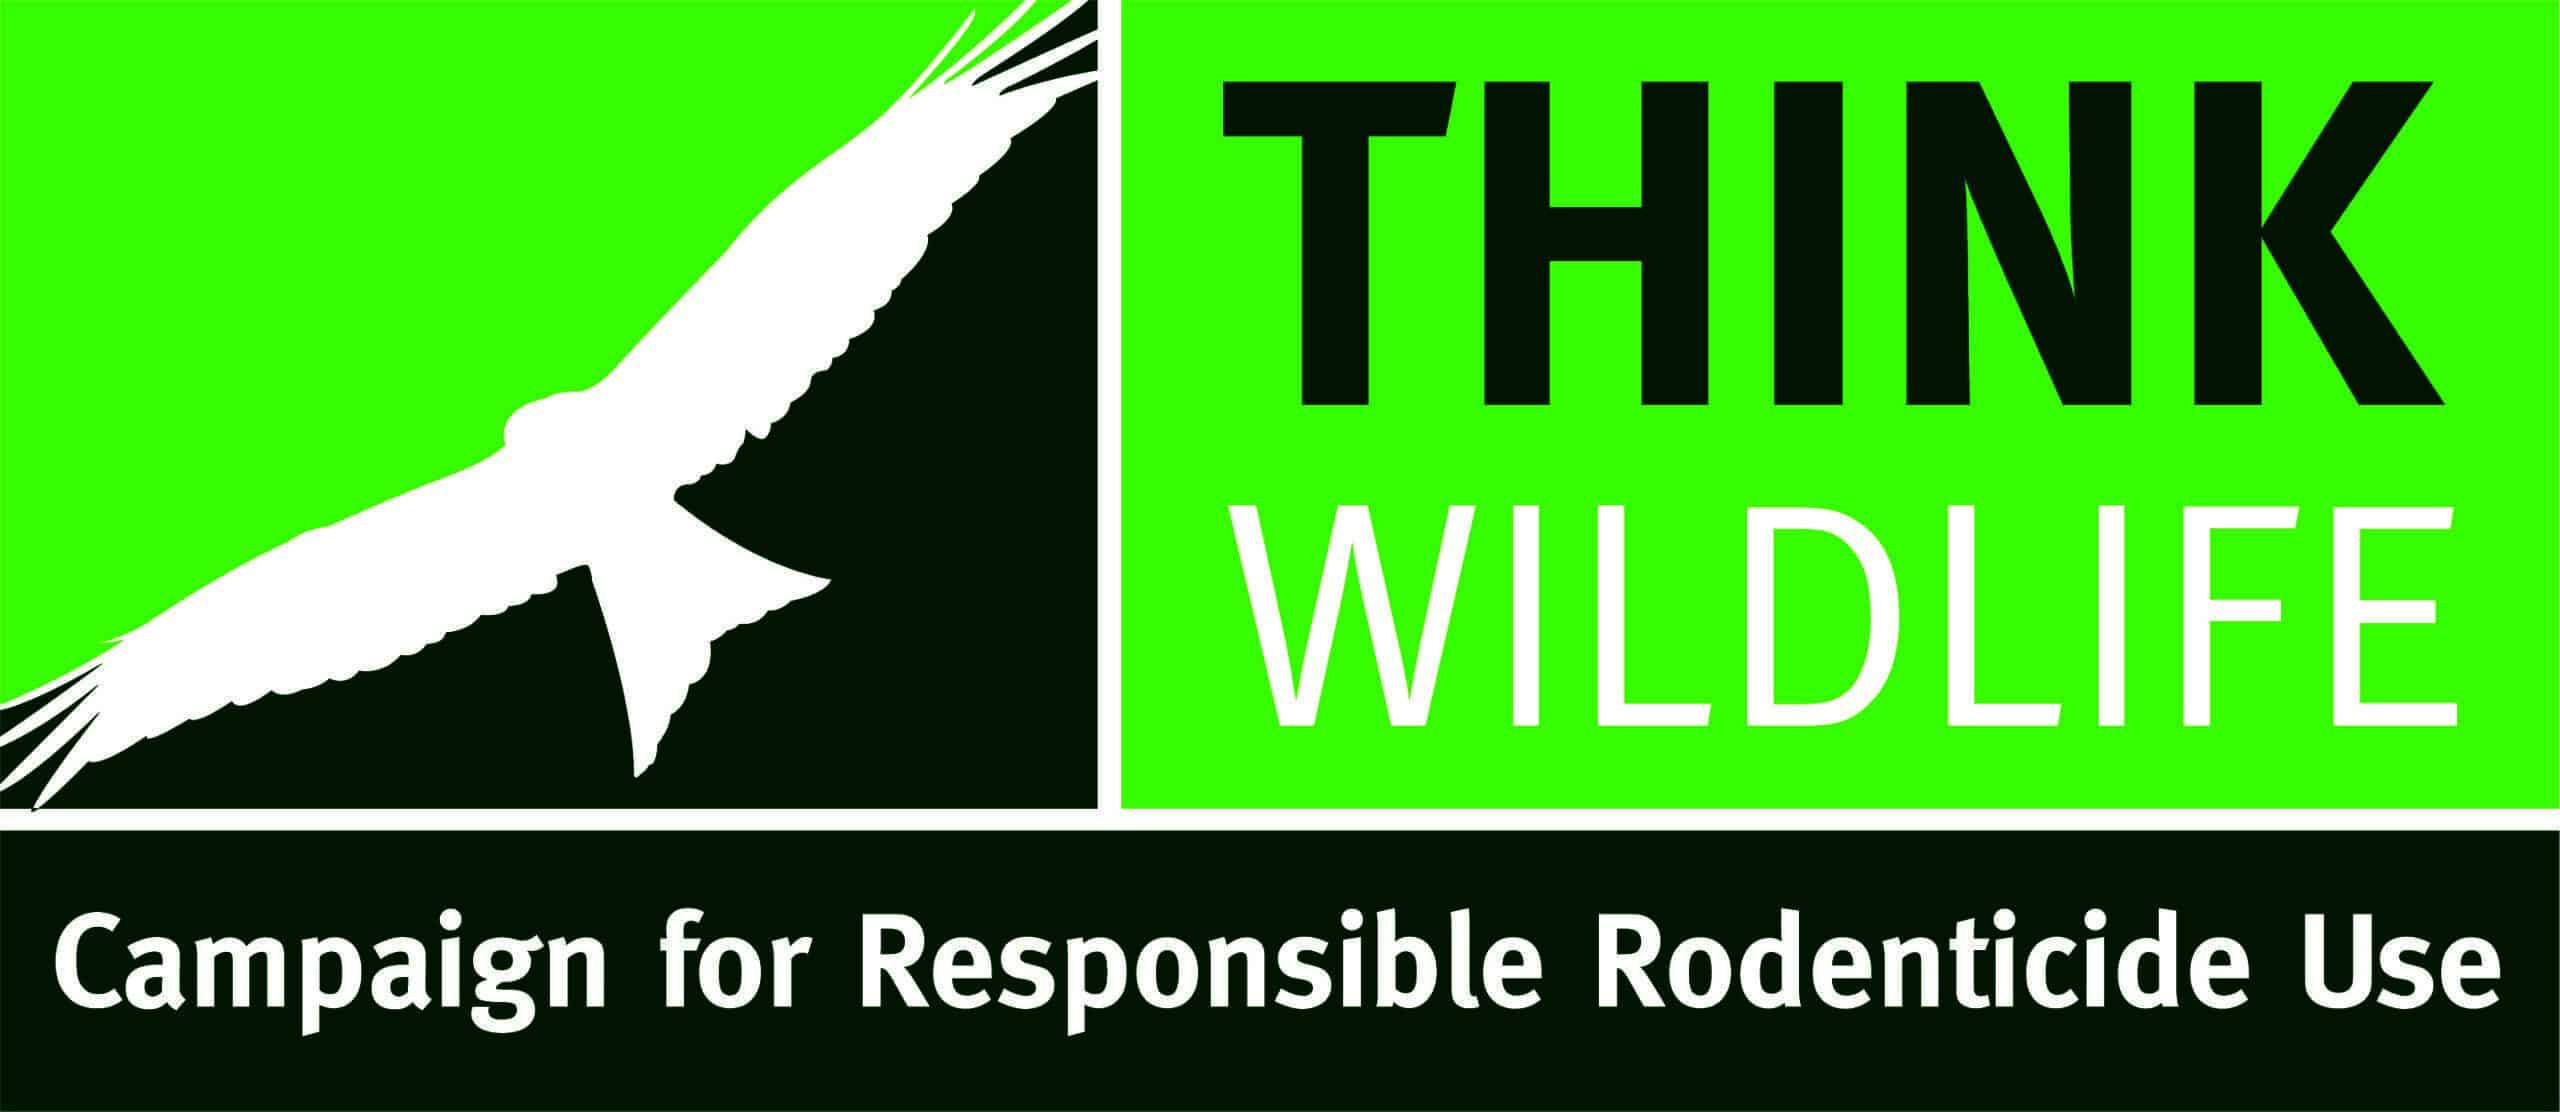 Campaign for Responsible Rodenticide Usage